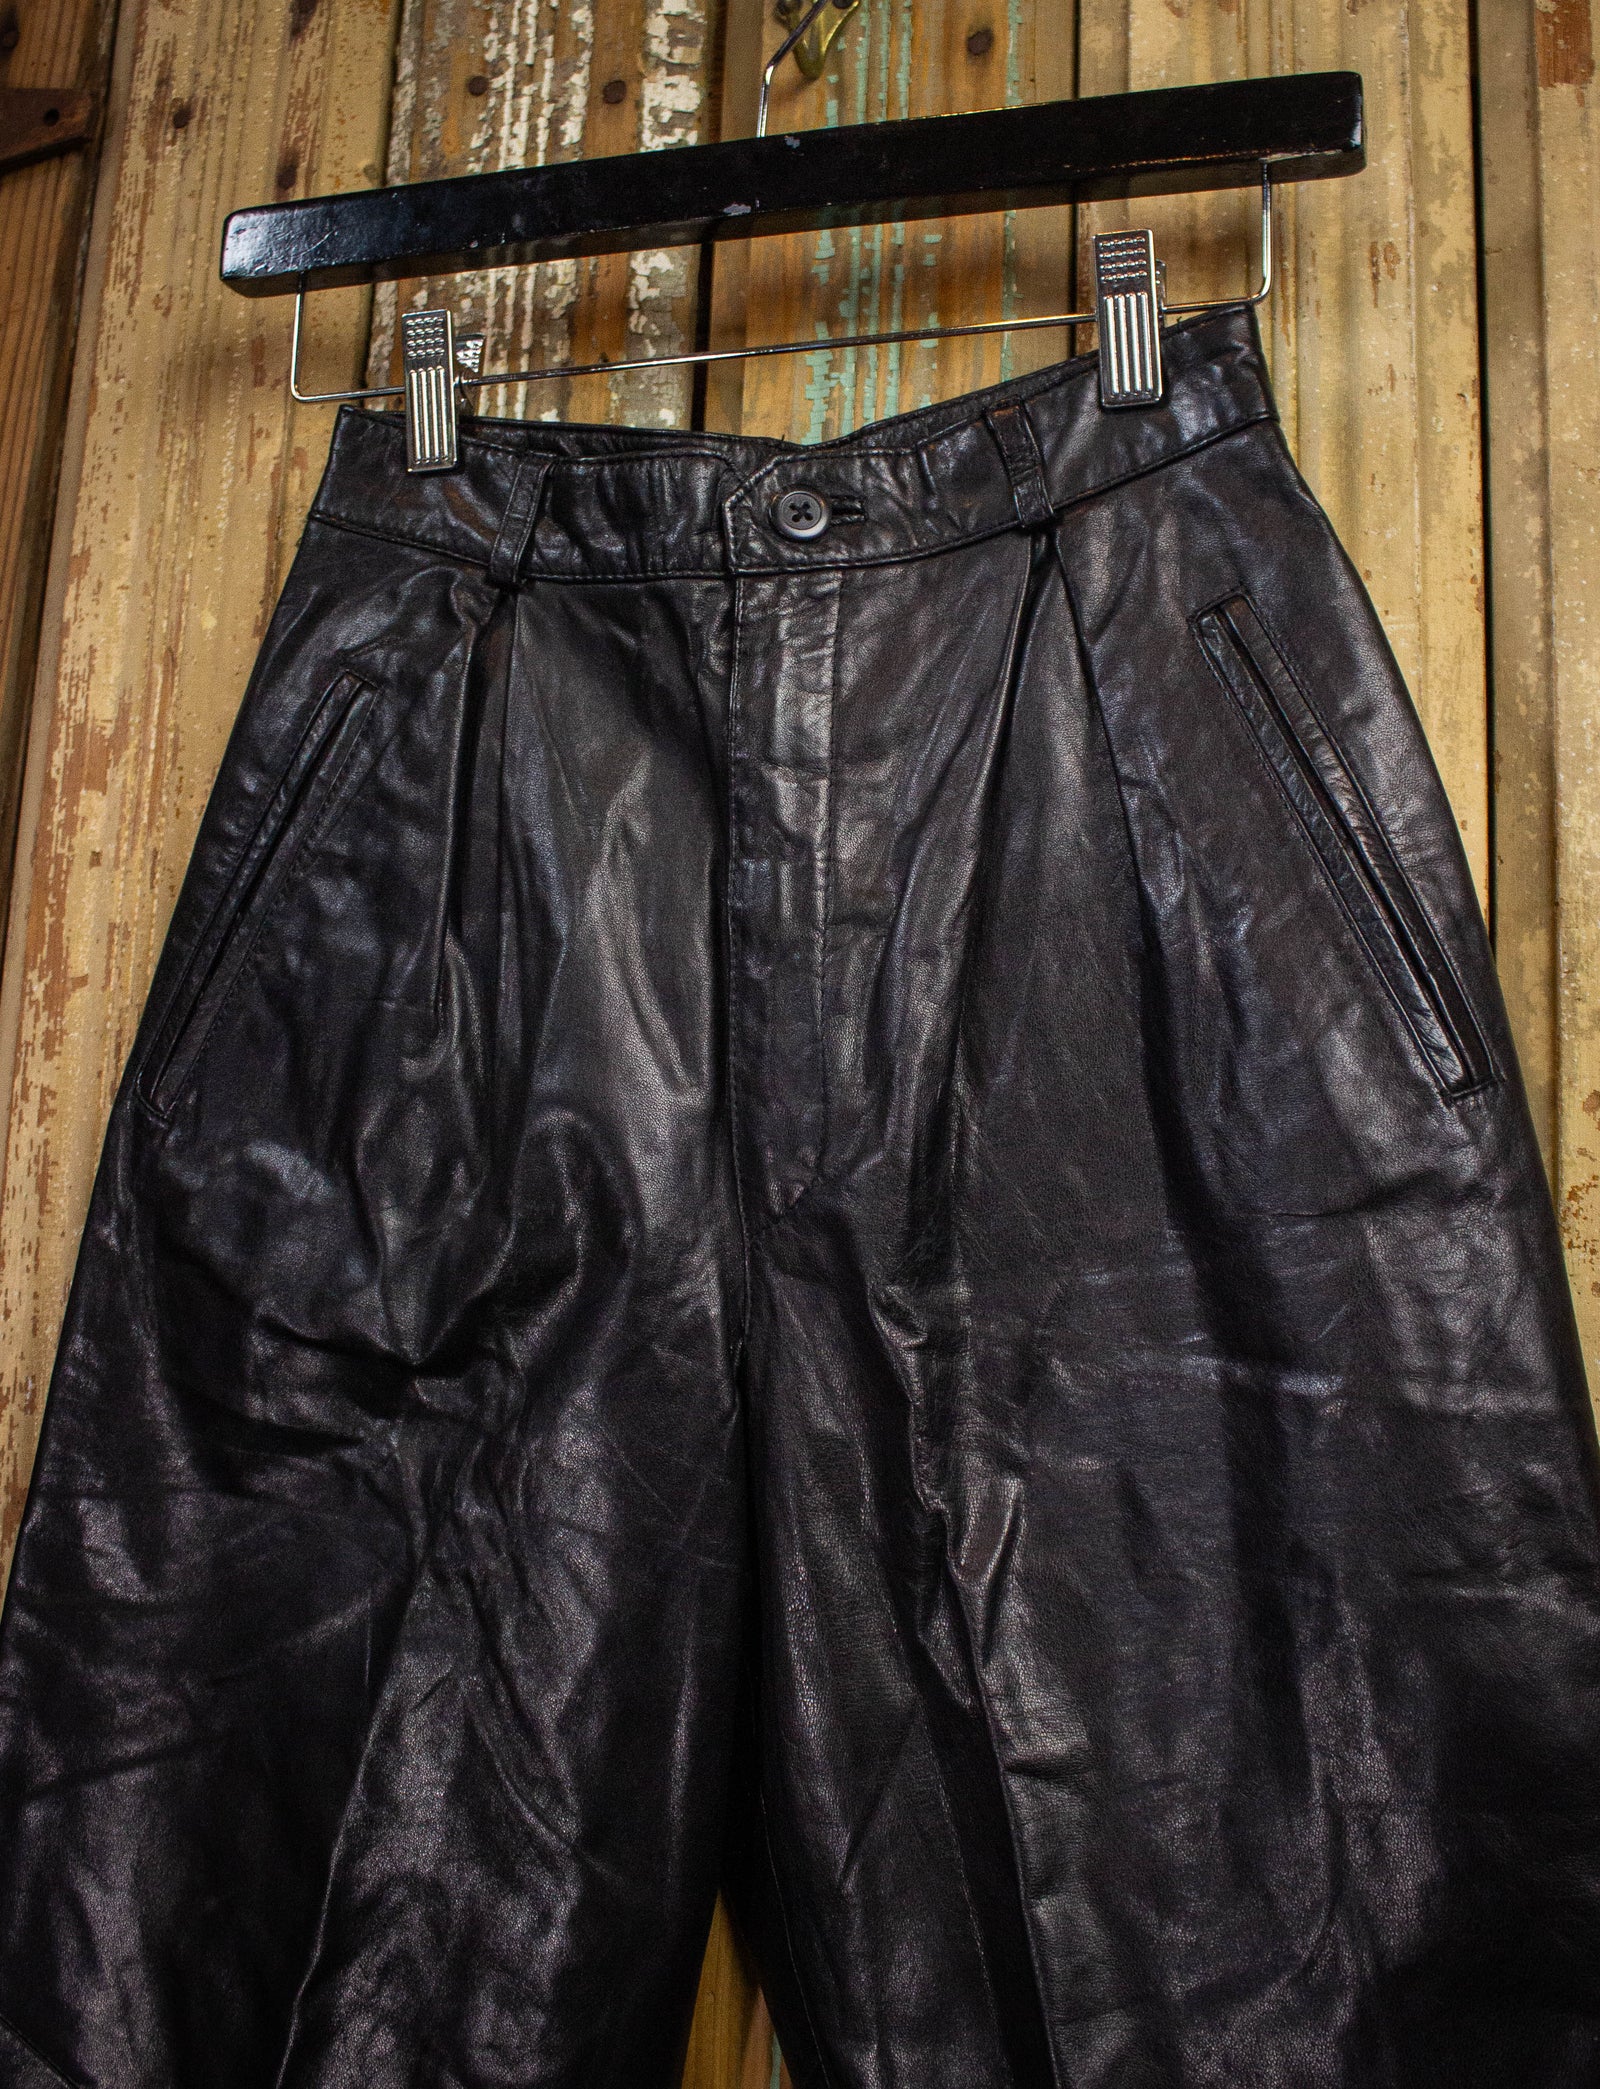 Vintage Wilsons Leather Shorts 80s Black 24w